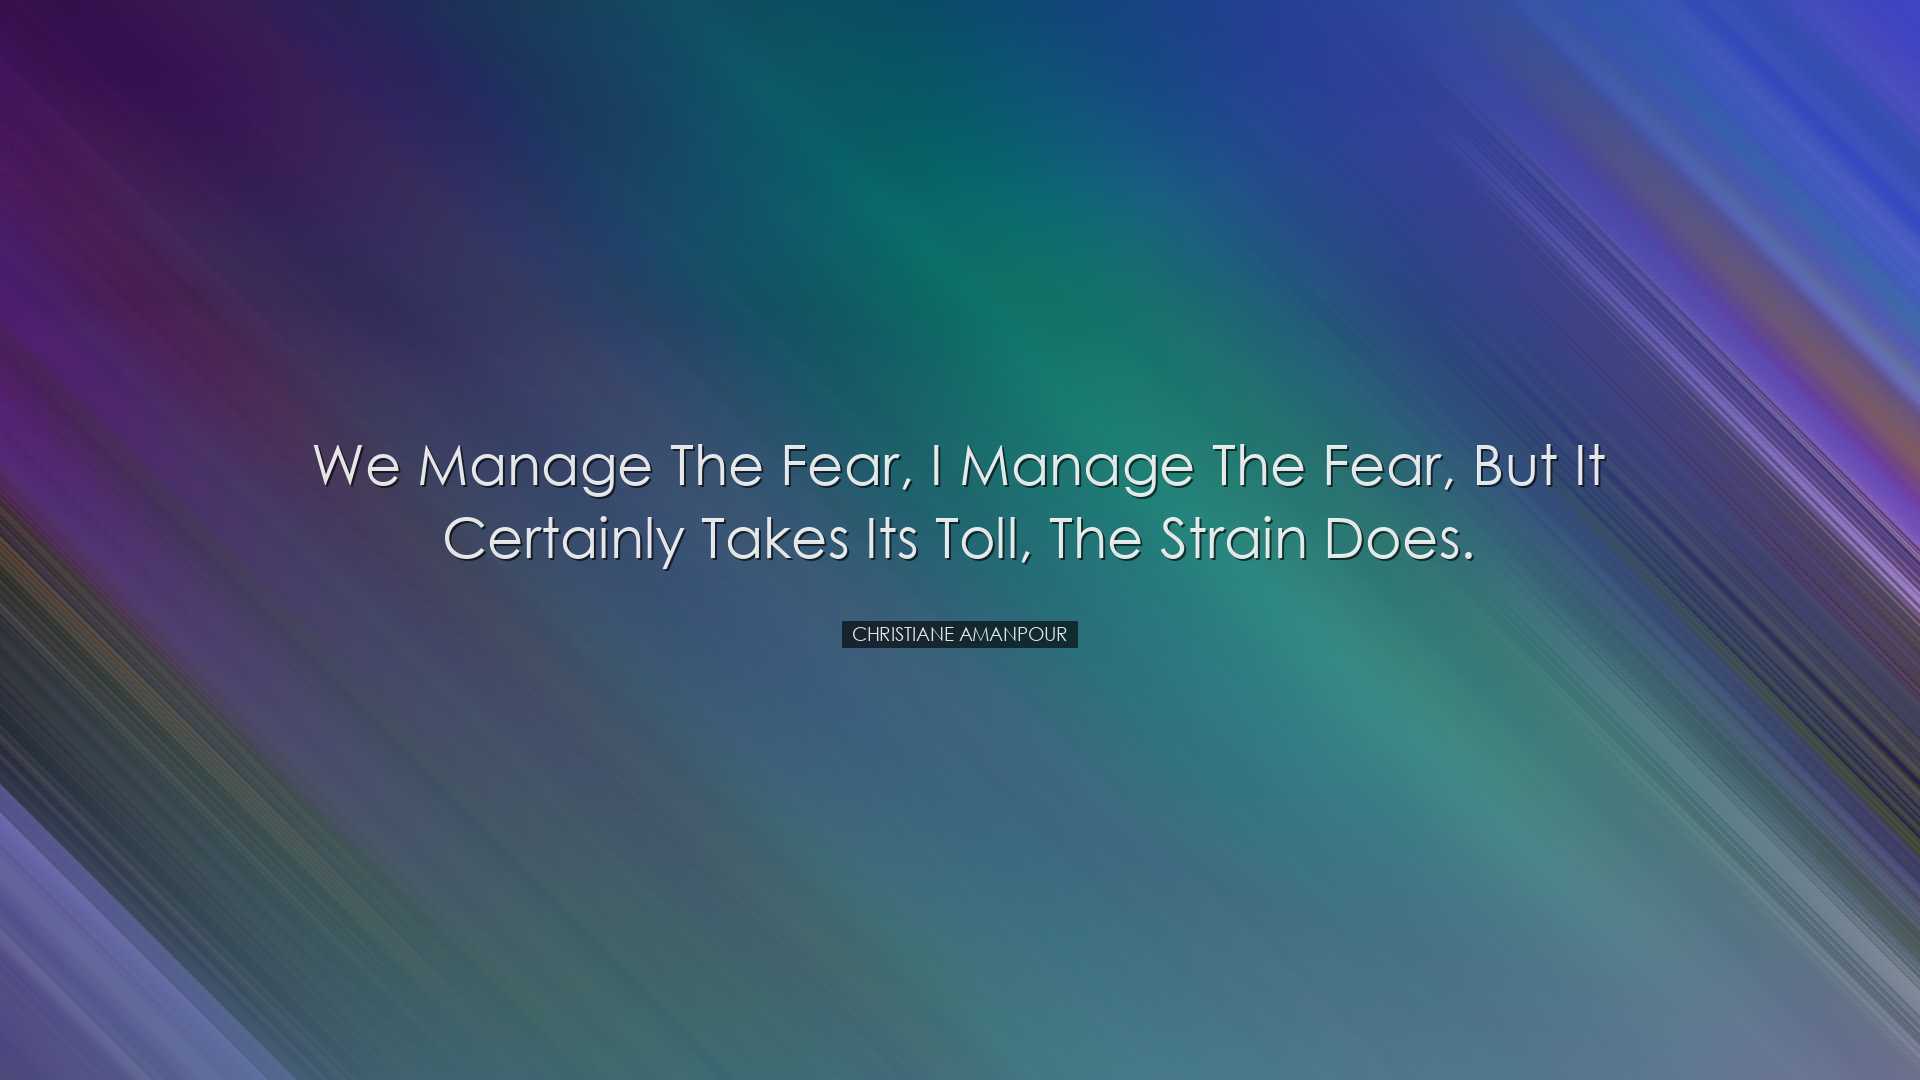 We manage the fear, I manage the fear, but it certainly takes its